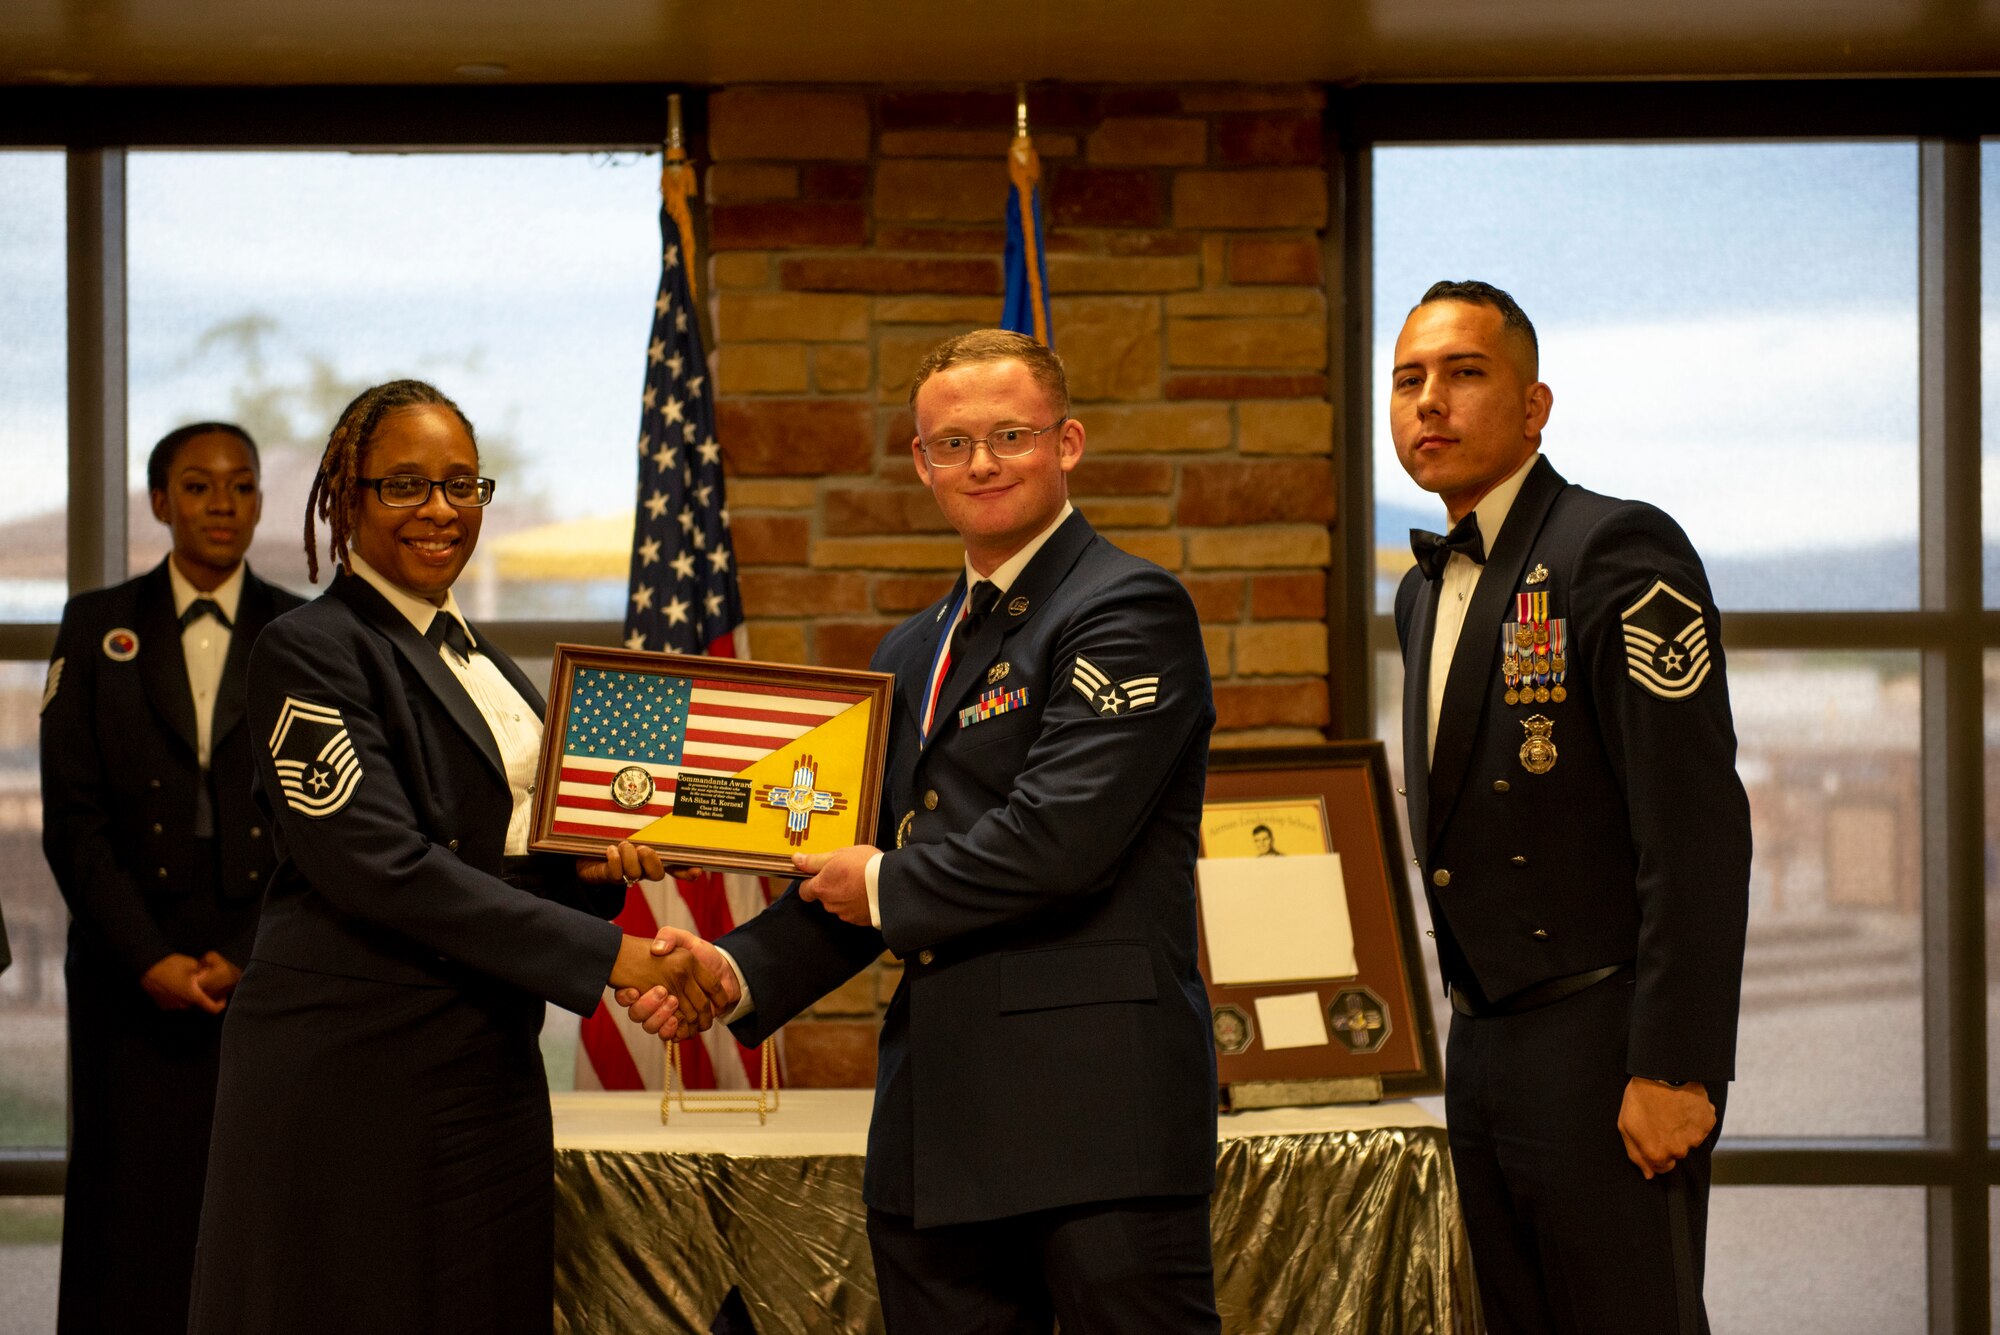 Senior Airman Silas Kornexl, Airman Leadership School graduate, middle, accepts the Commandant’s Award from Senior Master Sgt. Daisha Brown, 49th Logistics Readiness Squadron superintendent, left, and Master Sgt. Gabriel Larrazabal, 49th Force Support Squadron ALS Commandant, during the graduation of ALS class 22-6, July 7, 2022, on Holloman Air Force Base, New Mexico.